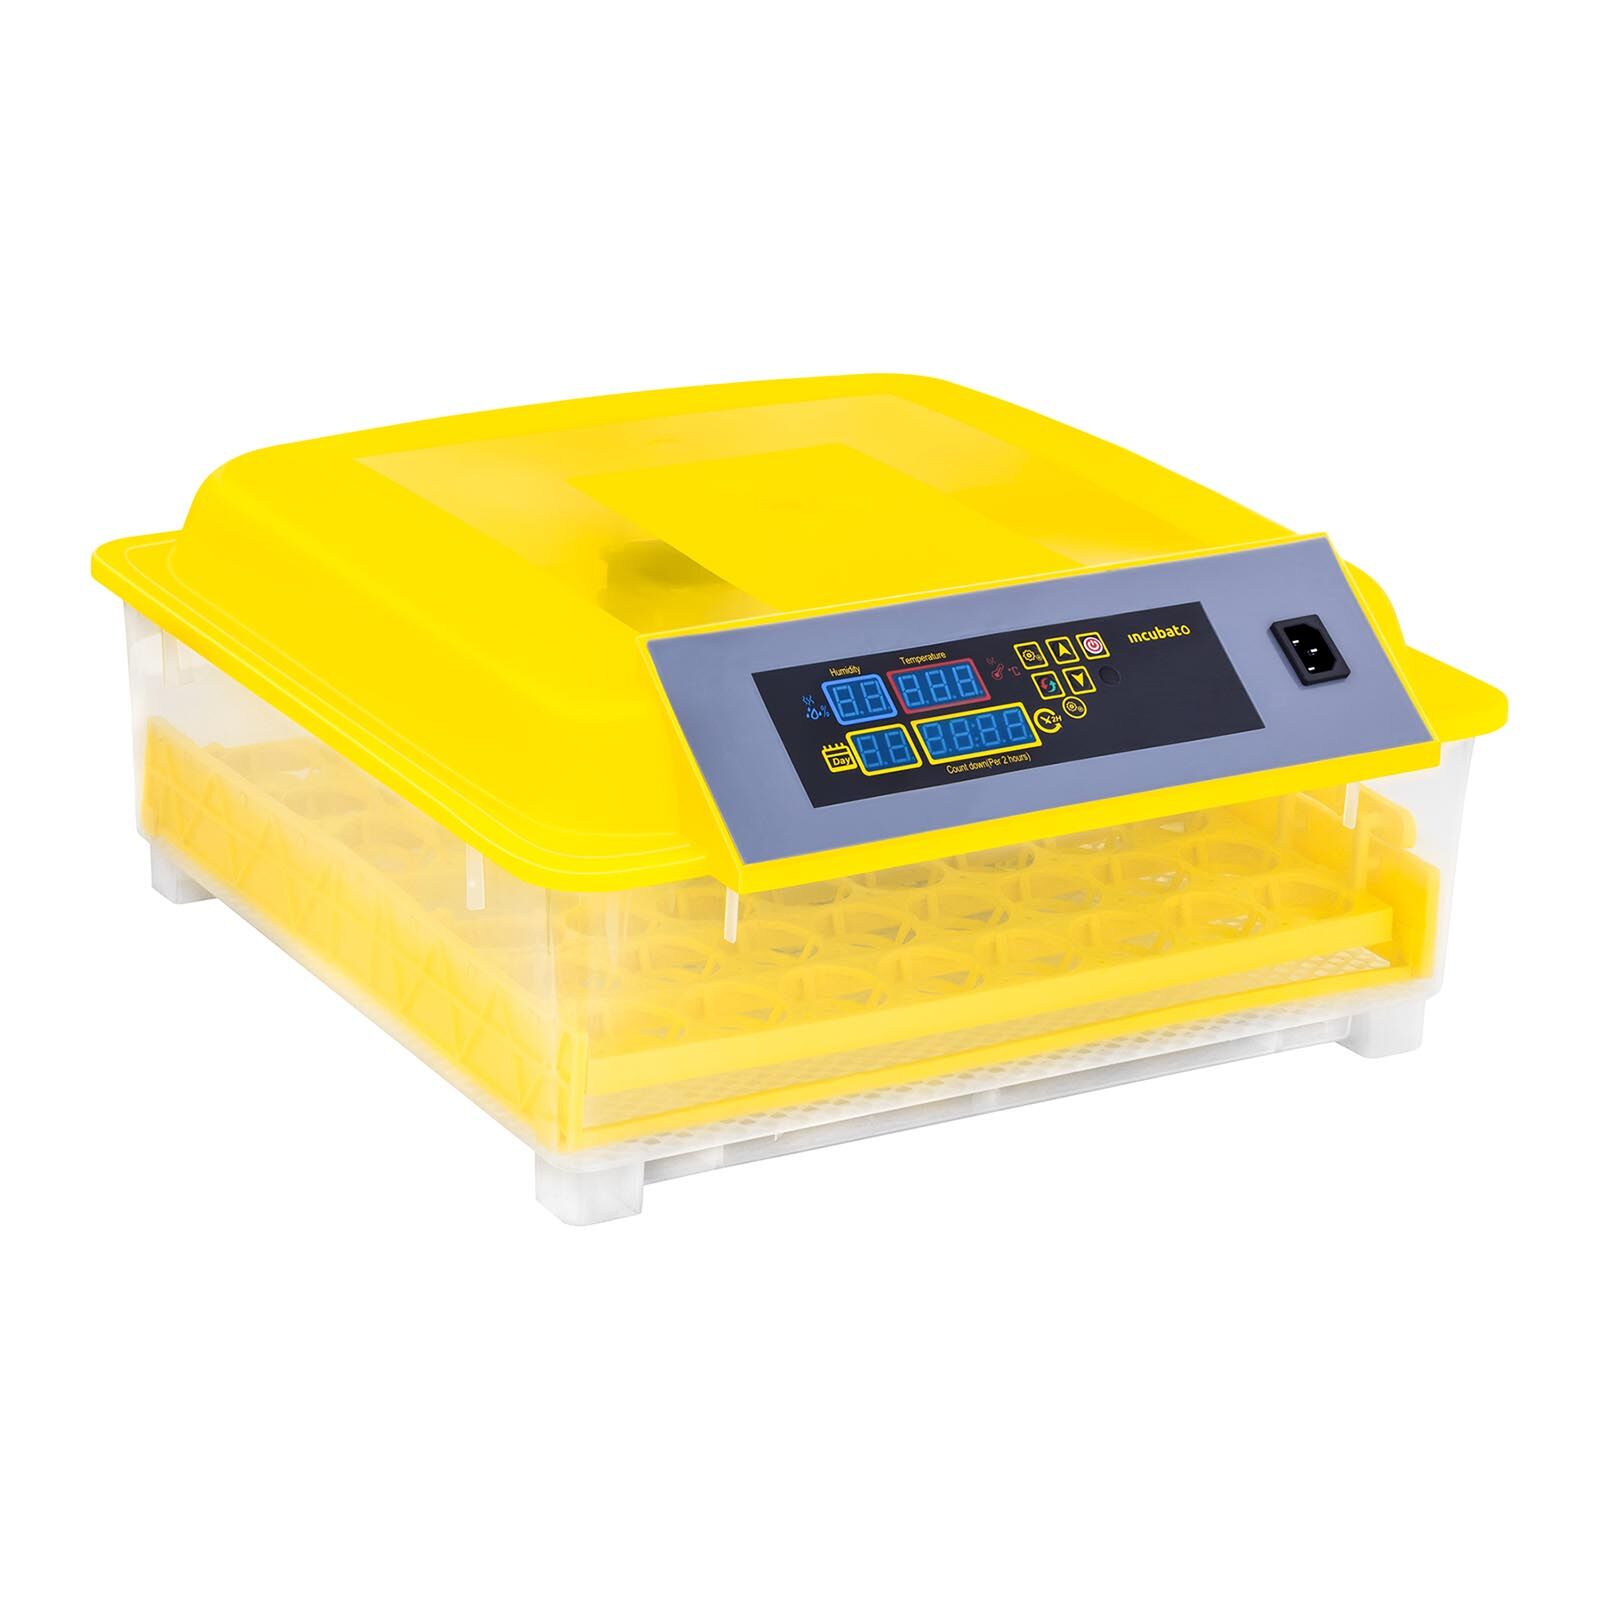 incubato Egg Incubator - 48 Eggs - Incl. Egg Candler and Water Dispenser - Fully Automatic IN-48DDI